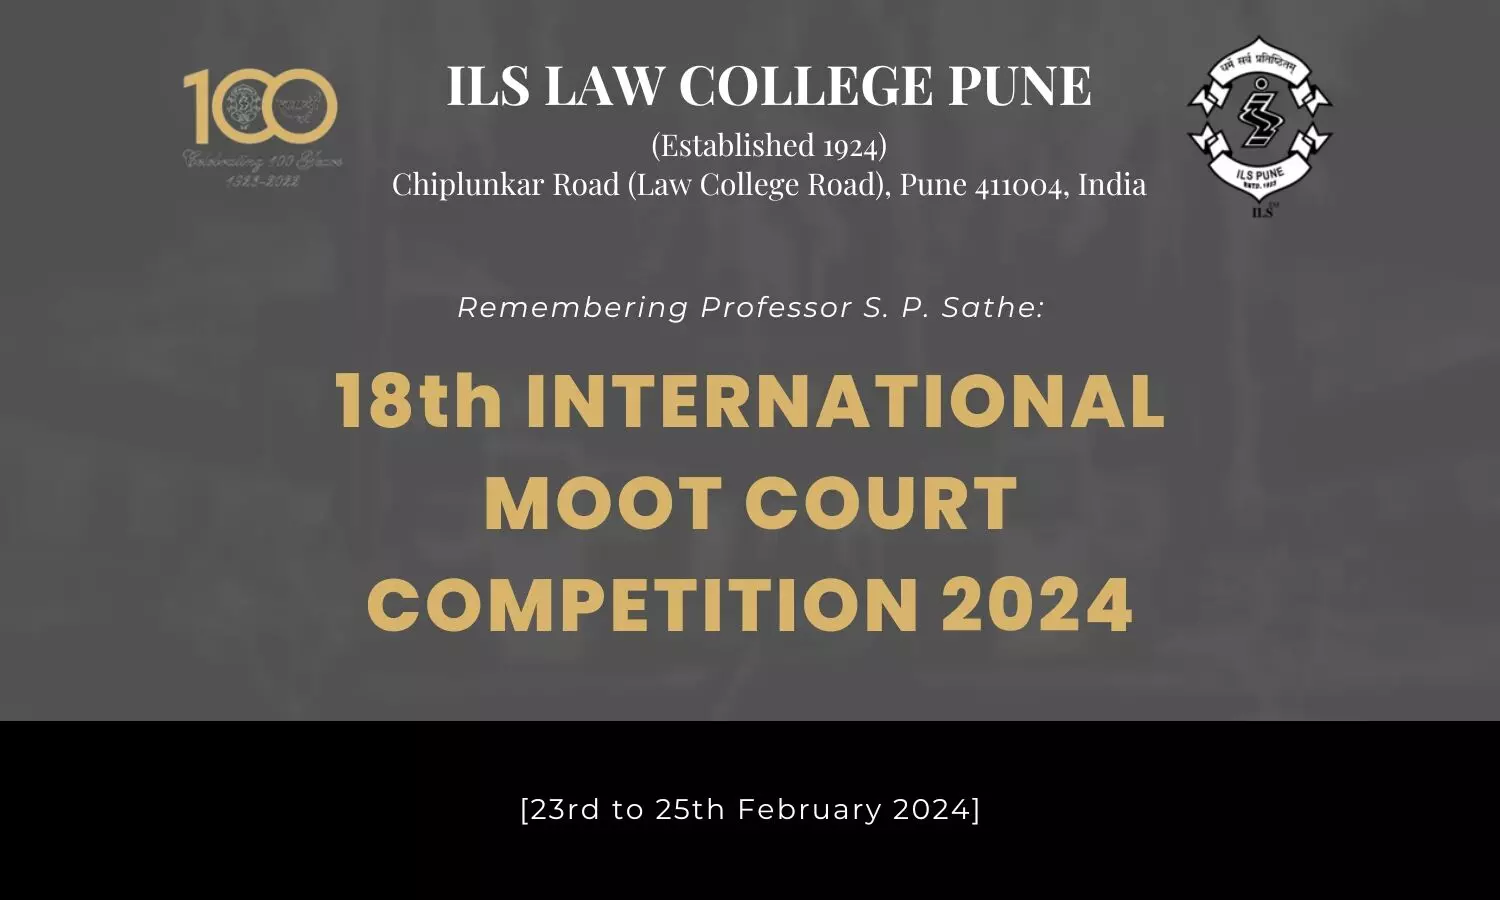 Professor SP Sathe 18th International Moot Court Competition 2024 | ILS Law College Pune